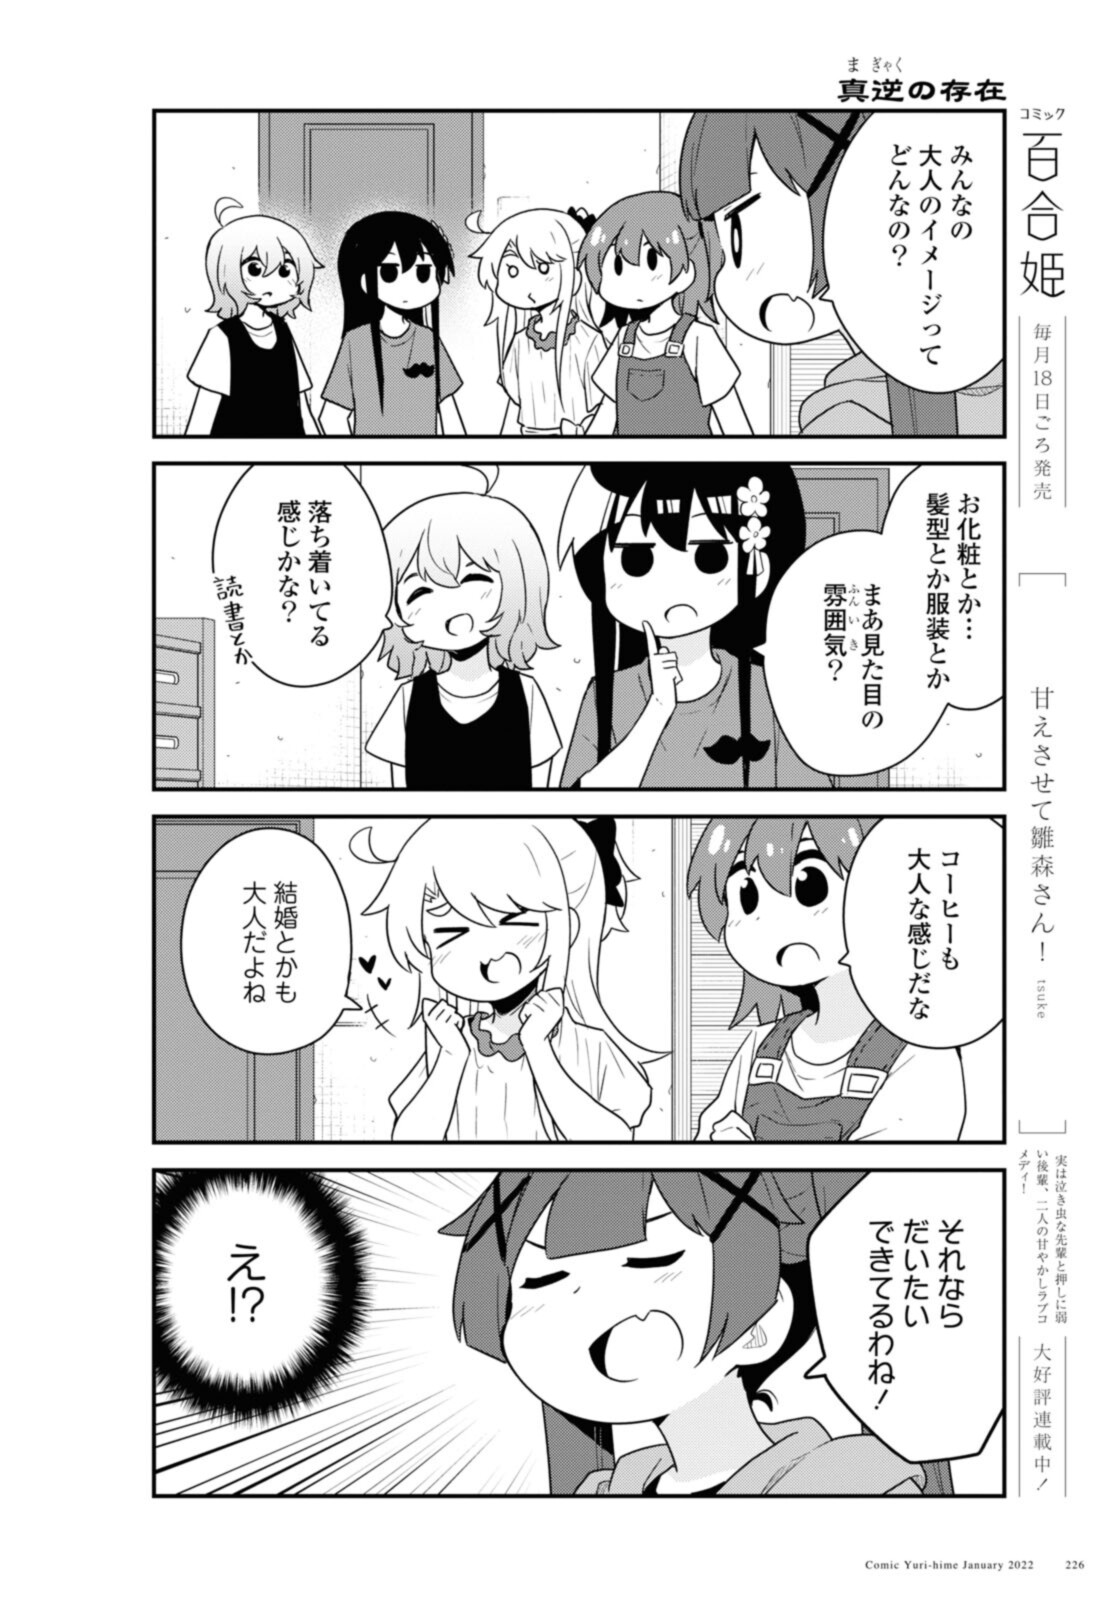 Wataten! An Angel Flew Down to Me 私に天使が舞い降りた！ 第91話 - Page 6